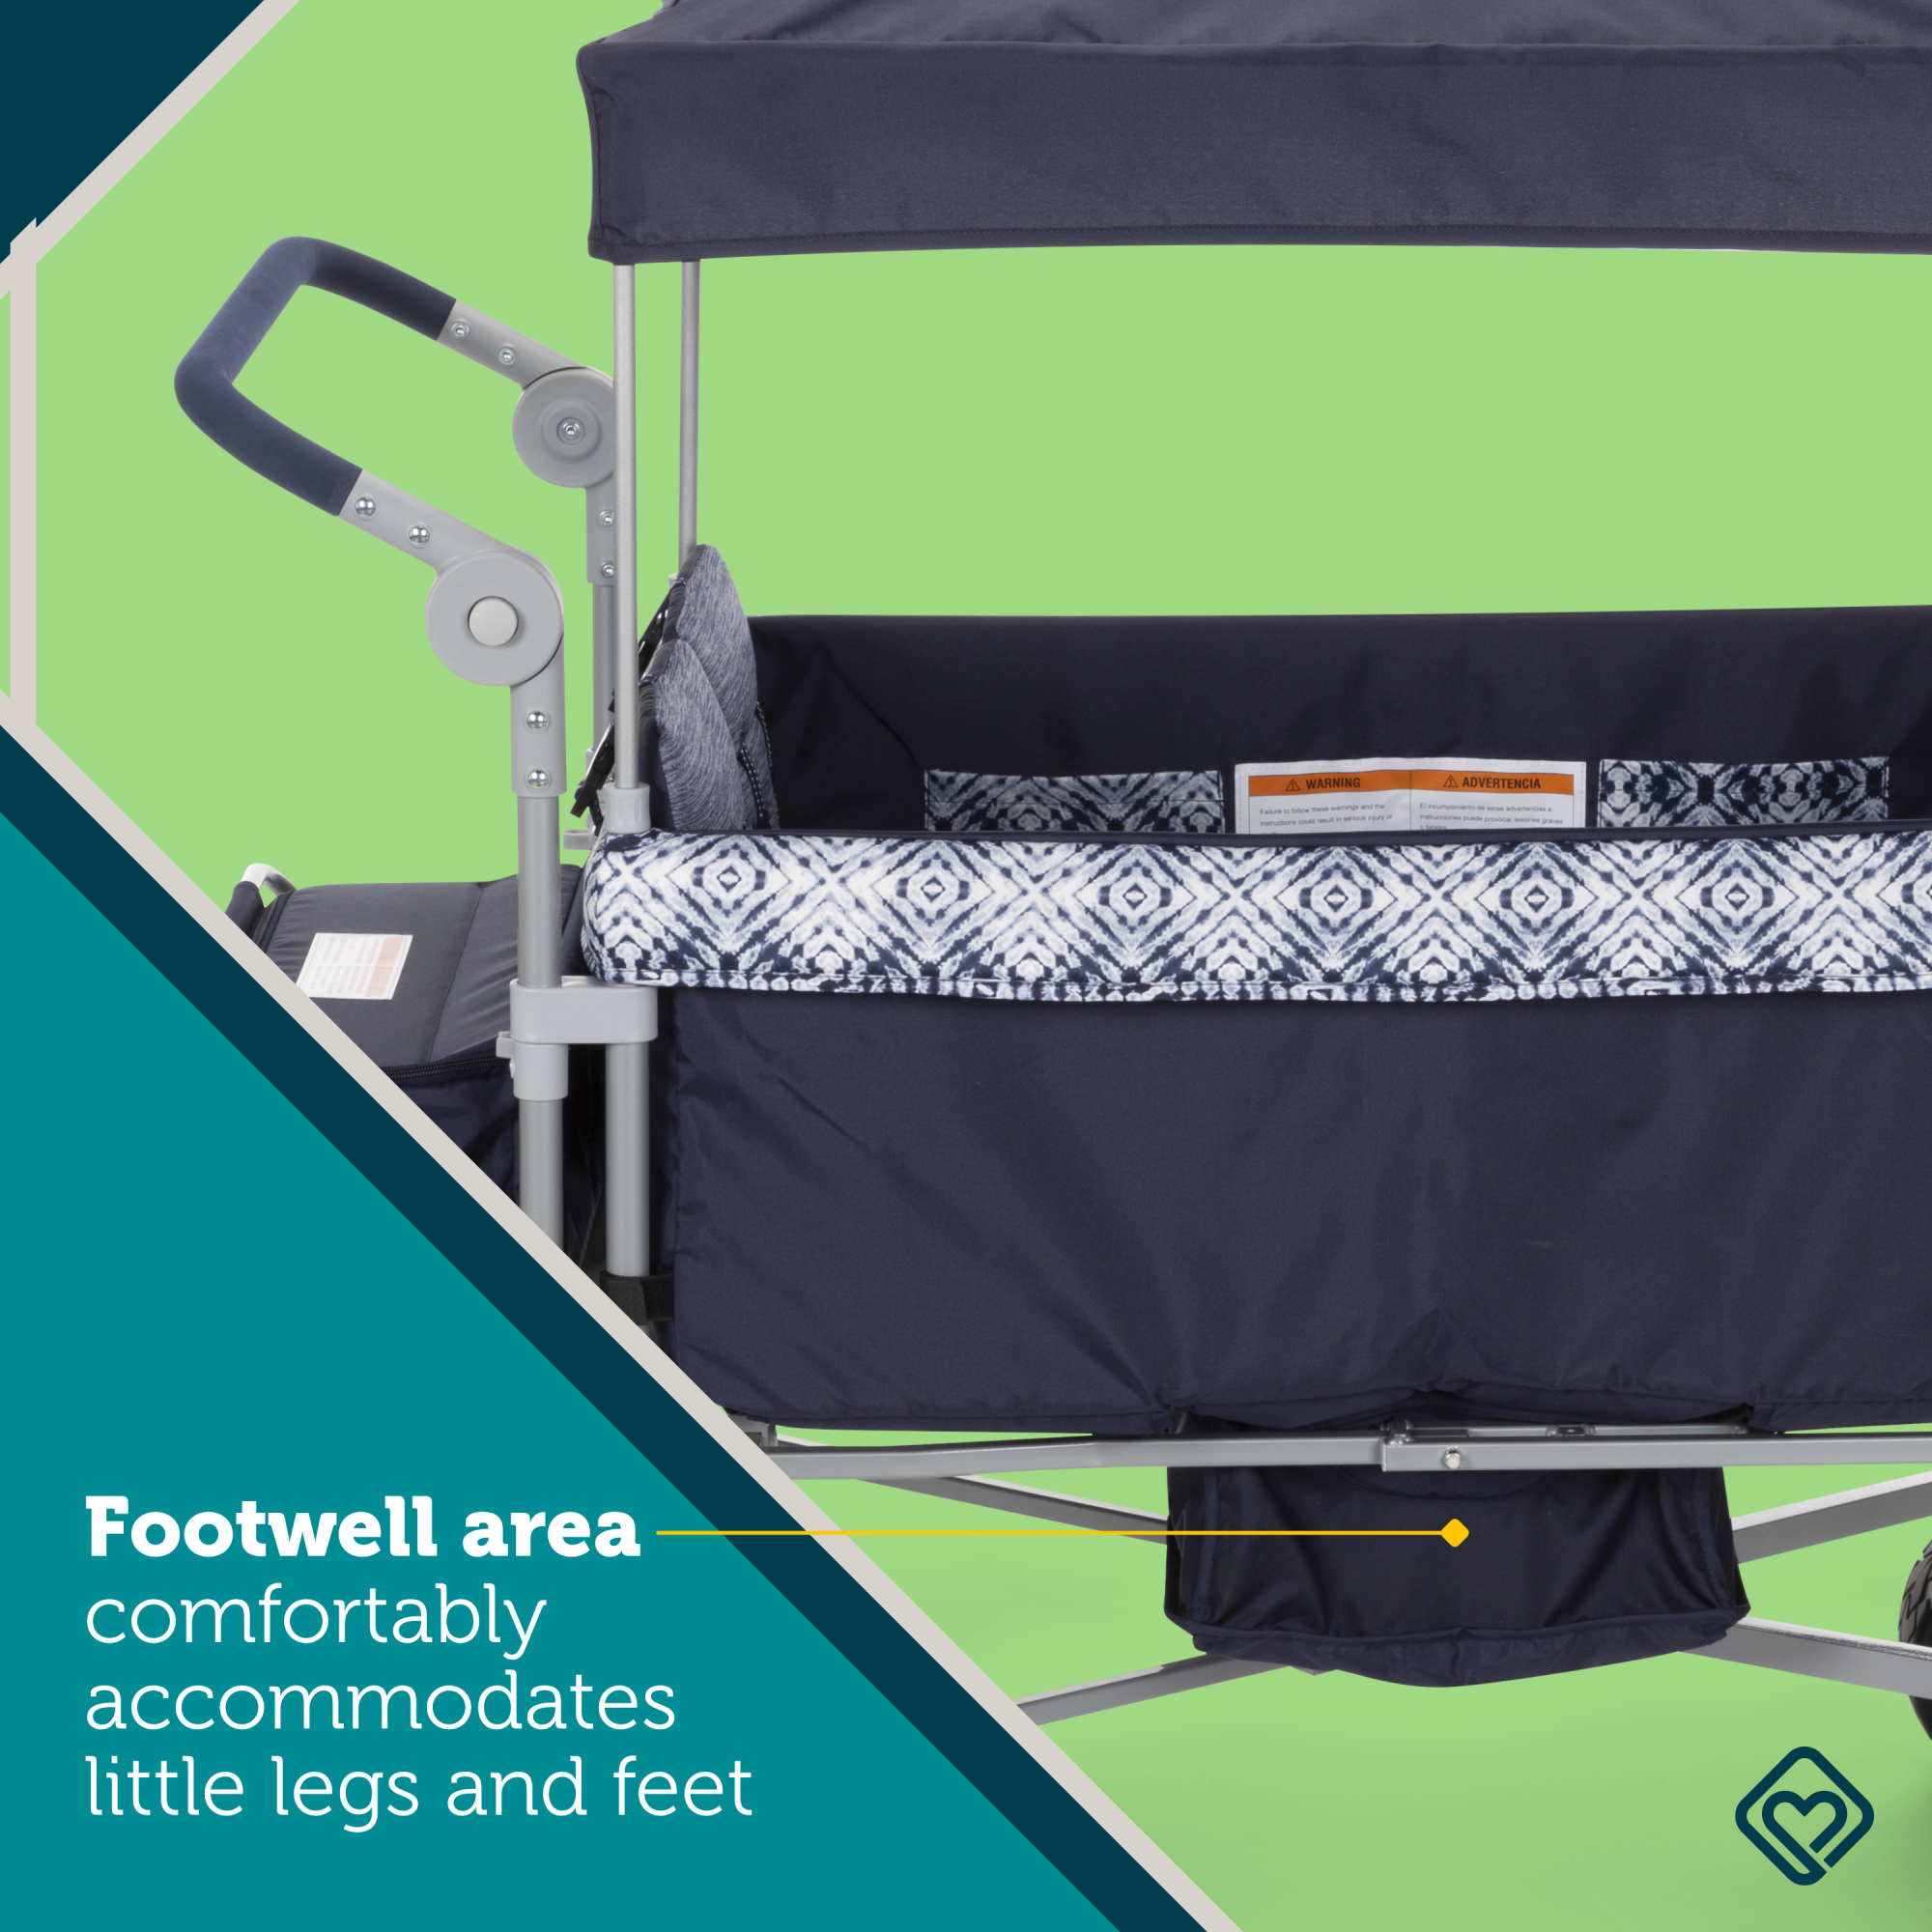 Summit Quad Wagon Stroller - footwell area comfortably accommodates little legs and feet